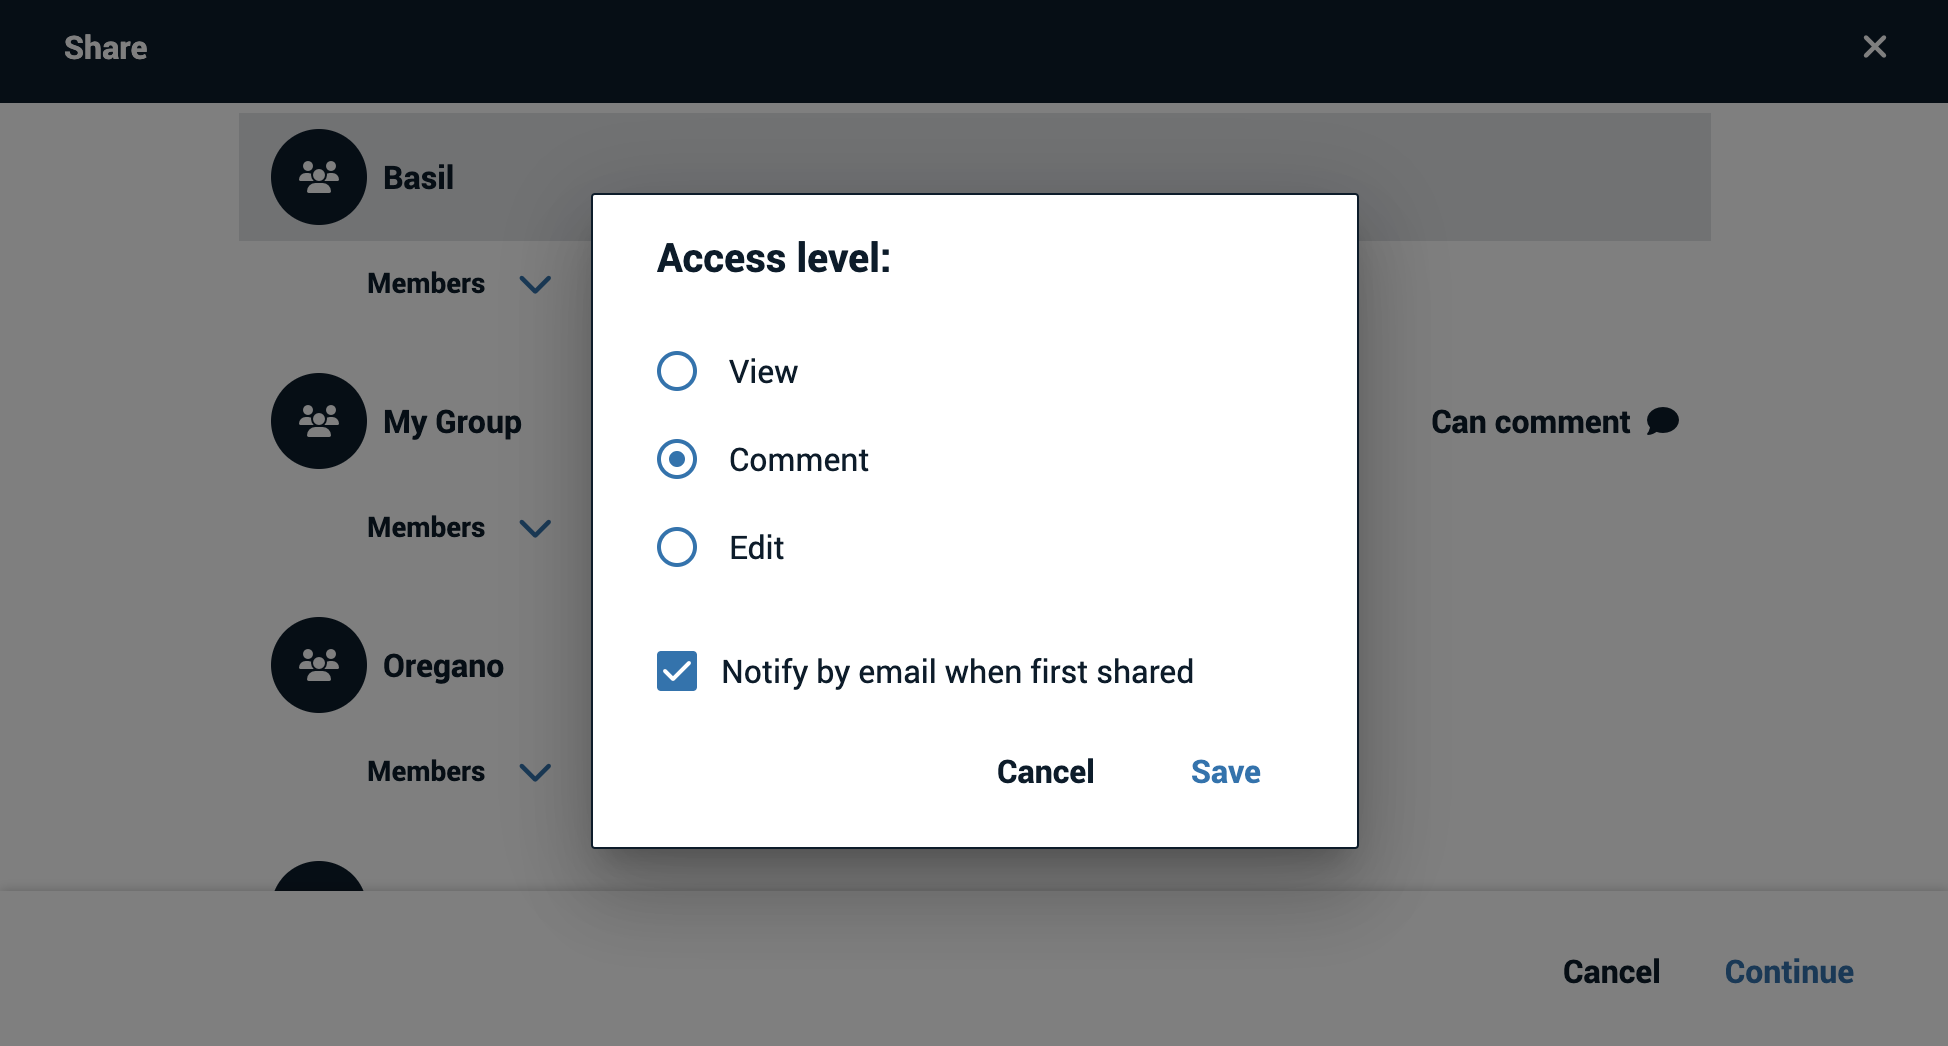 group_share_access_level.png